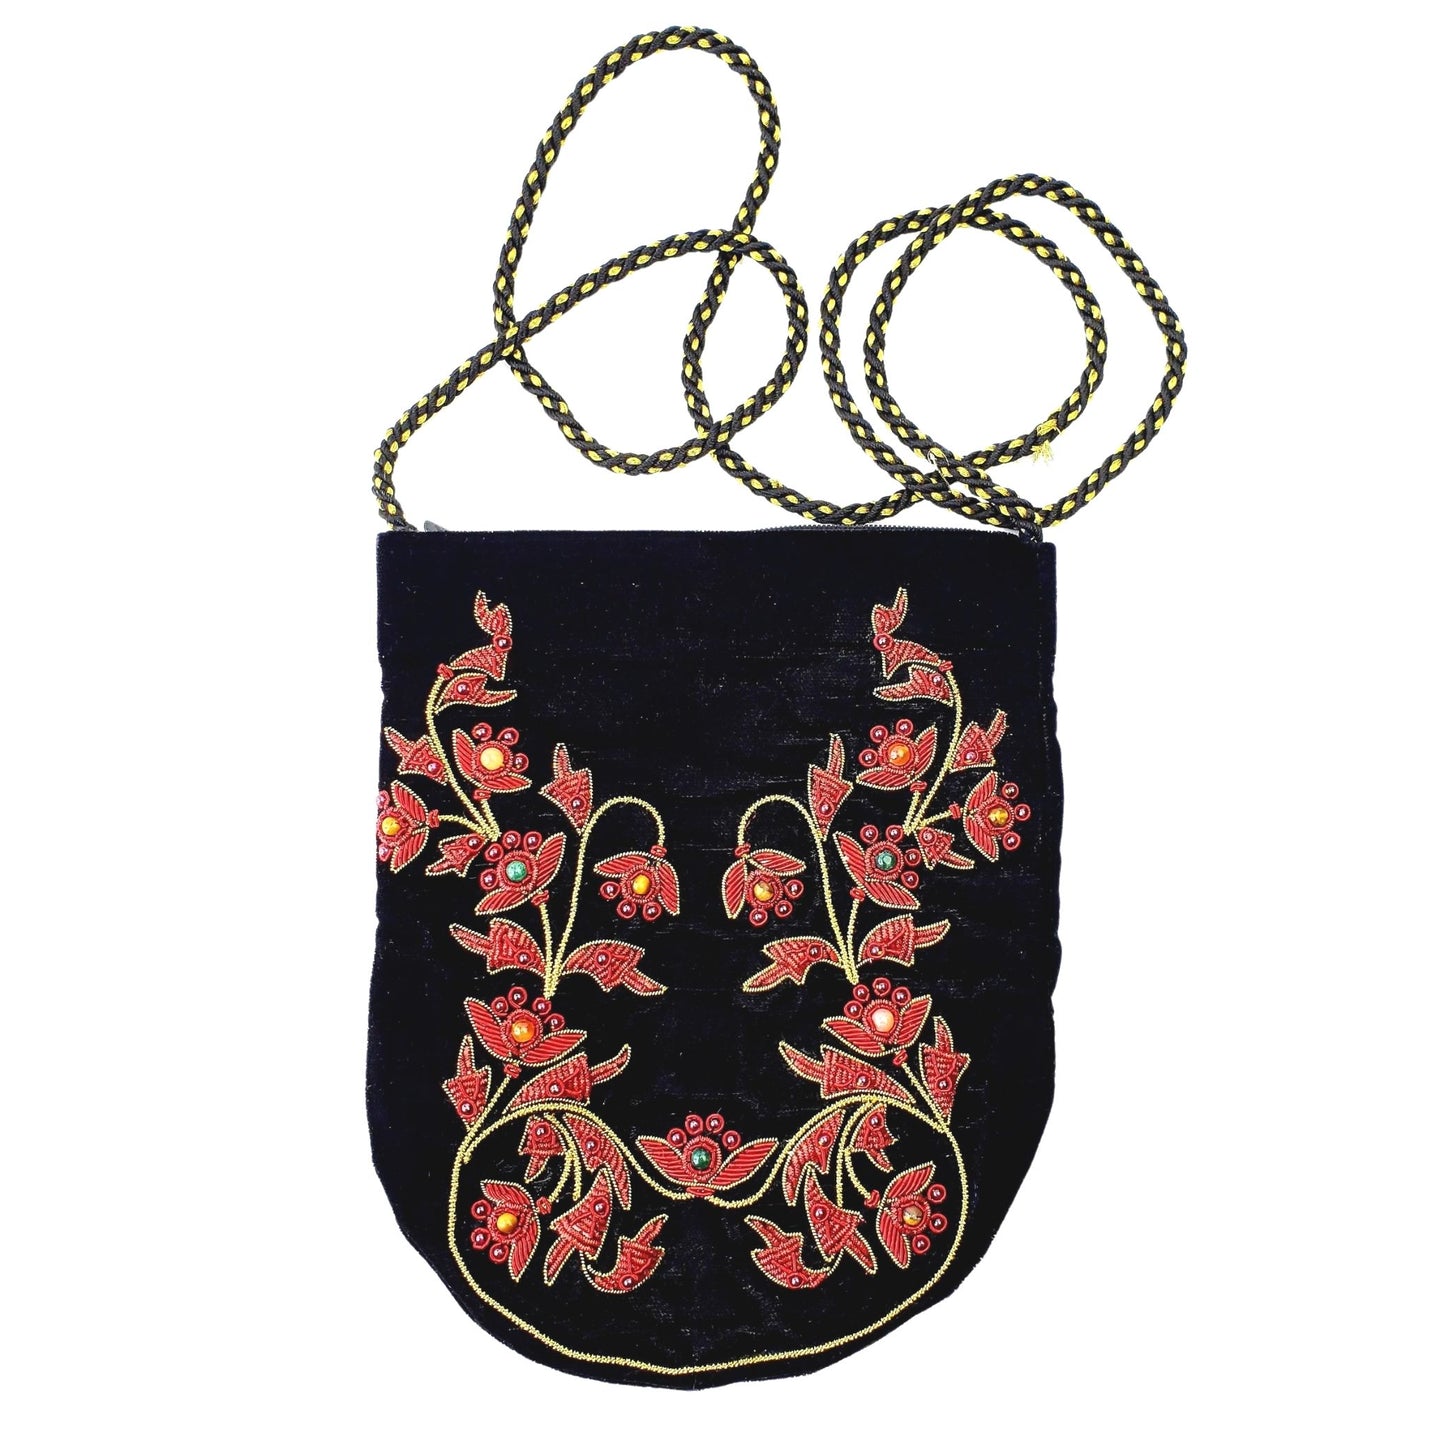 Black velvet slim crossbody bag hand embroidered with red and gold vines and flowers and embellished with semi precious stones, zardozi crossbody bag. 